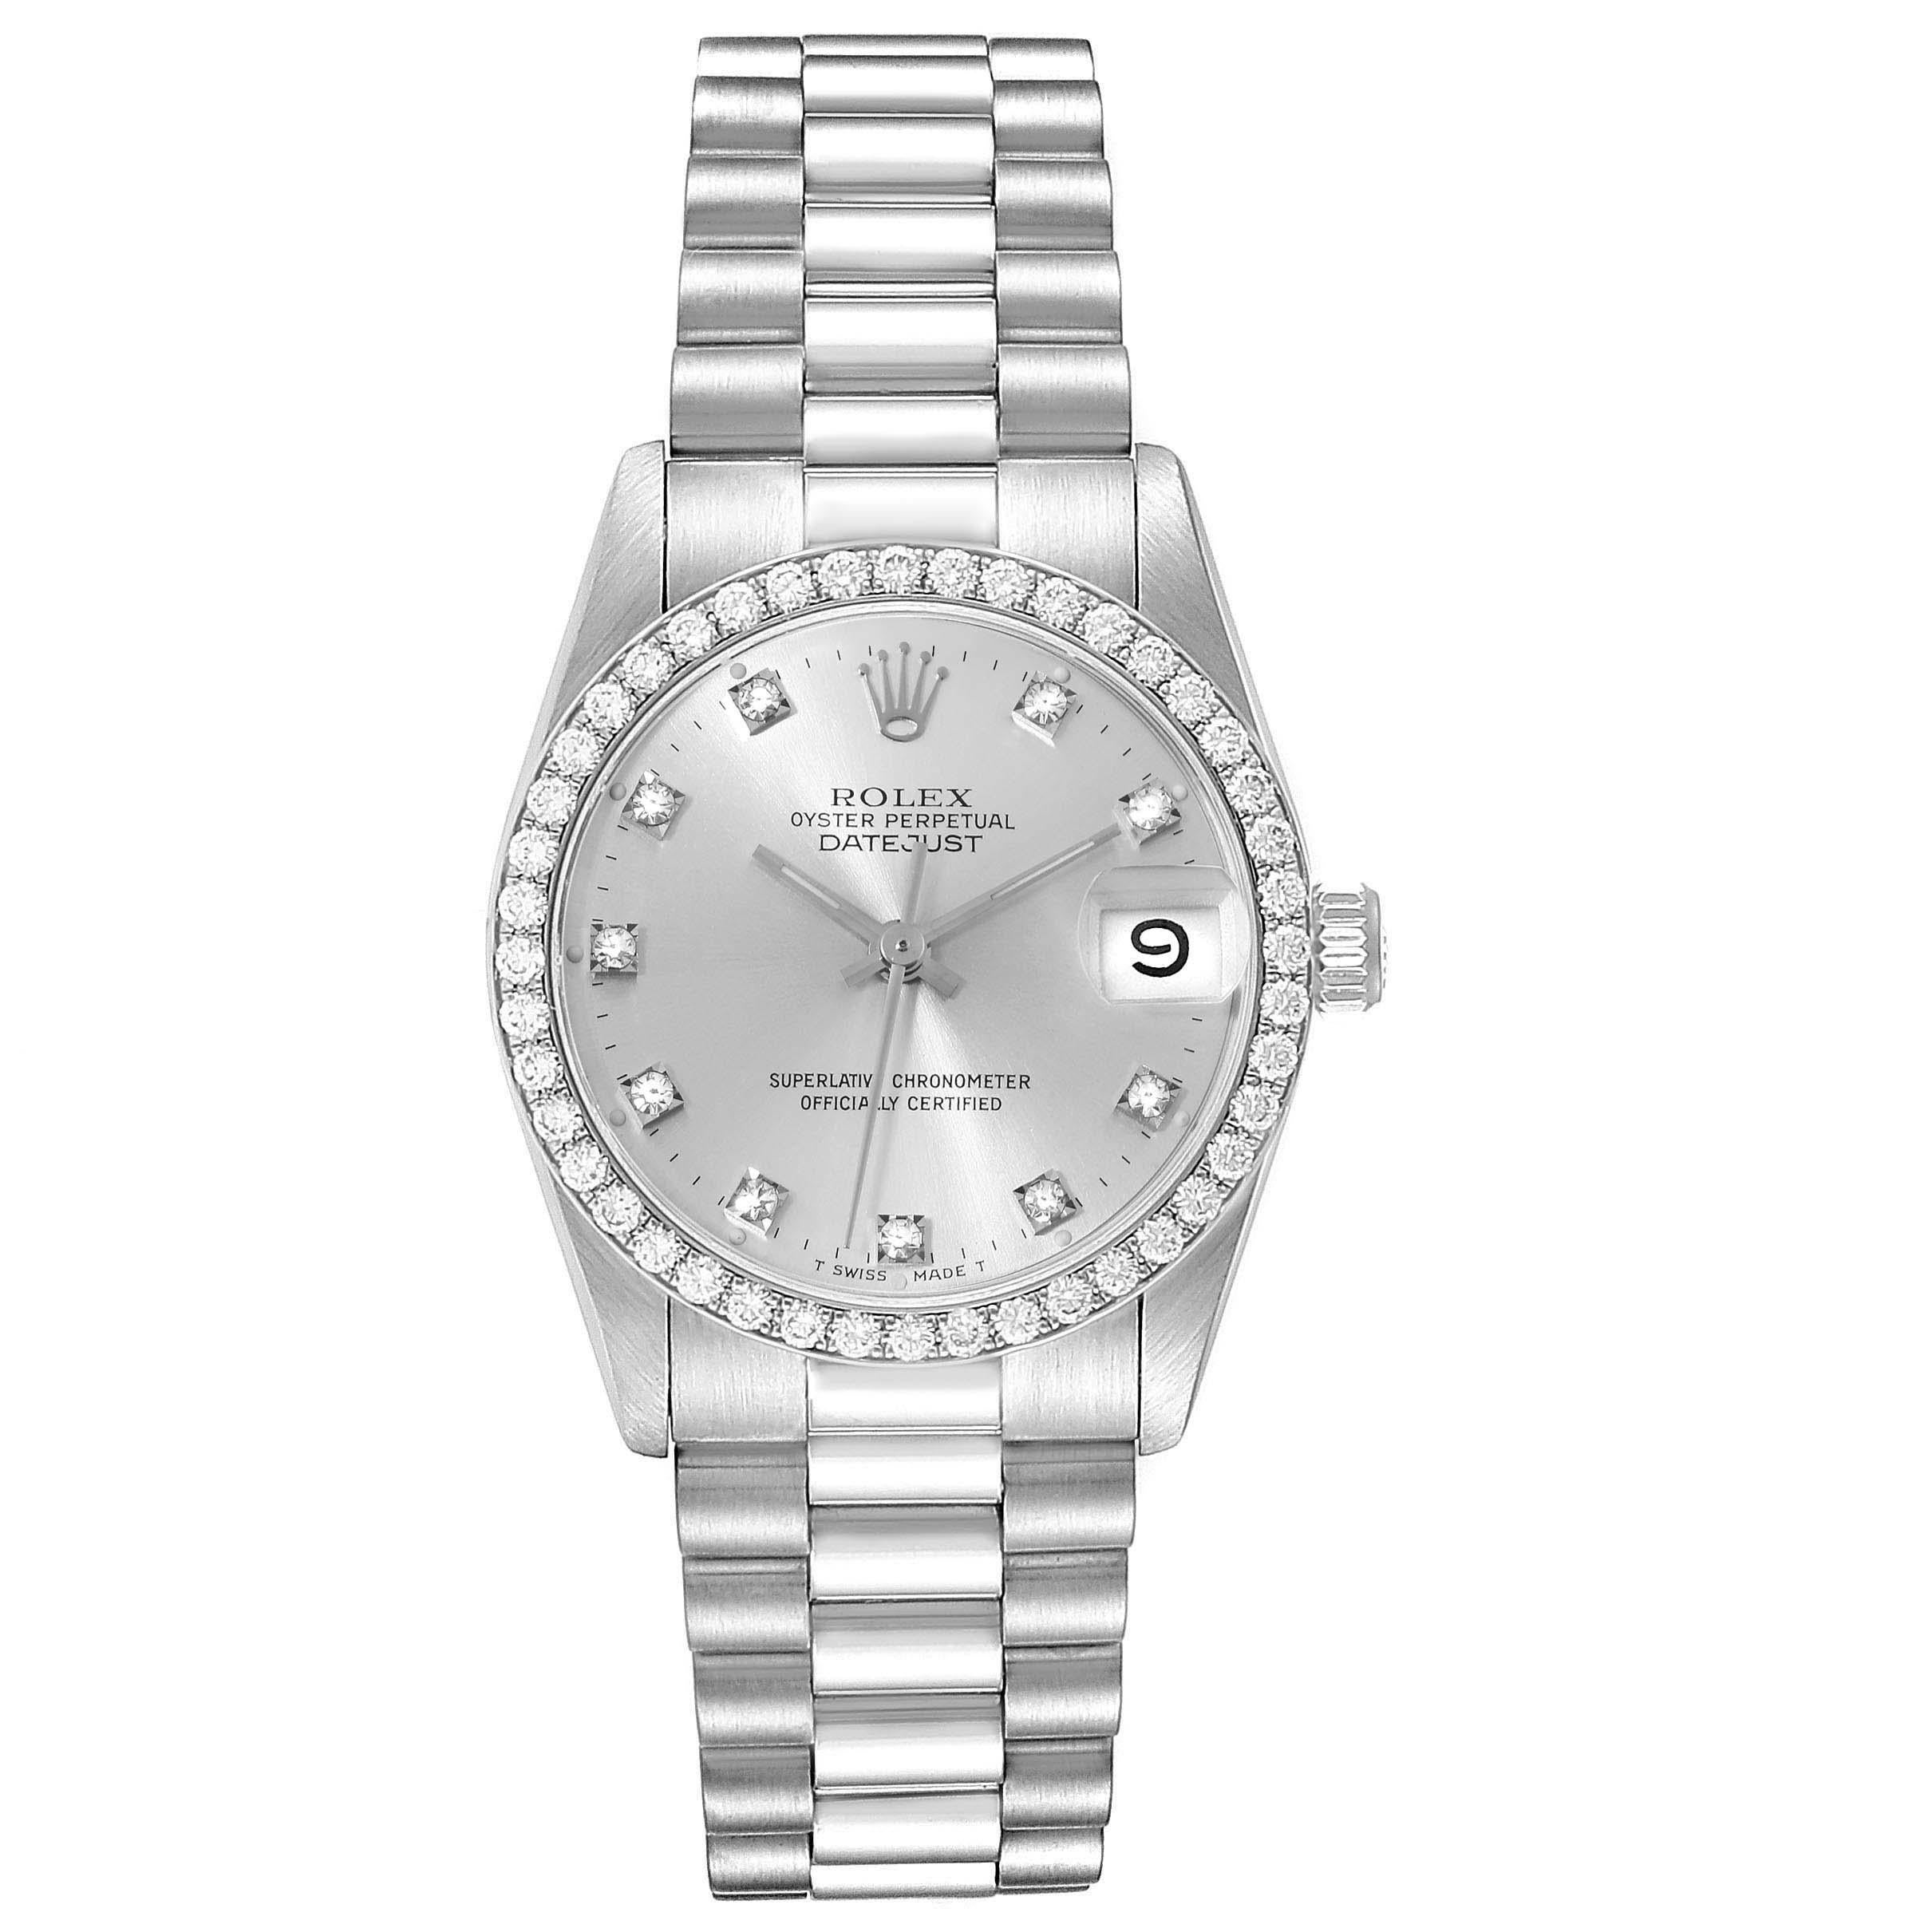 Rolex President Datejust Midsize White Gold Diamond Ladies Watch 68289. Officially certified chronometer automatic self-winding movement. 18k white gold oyster case 31.0 mm in diameter. Rolex logo on a crown. Original Rolex factory diamond bezel.